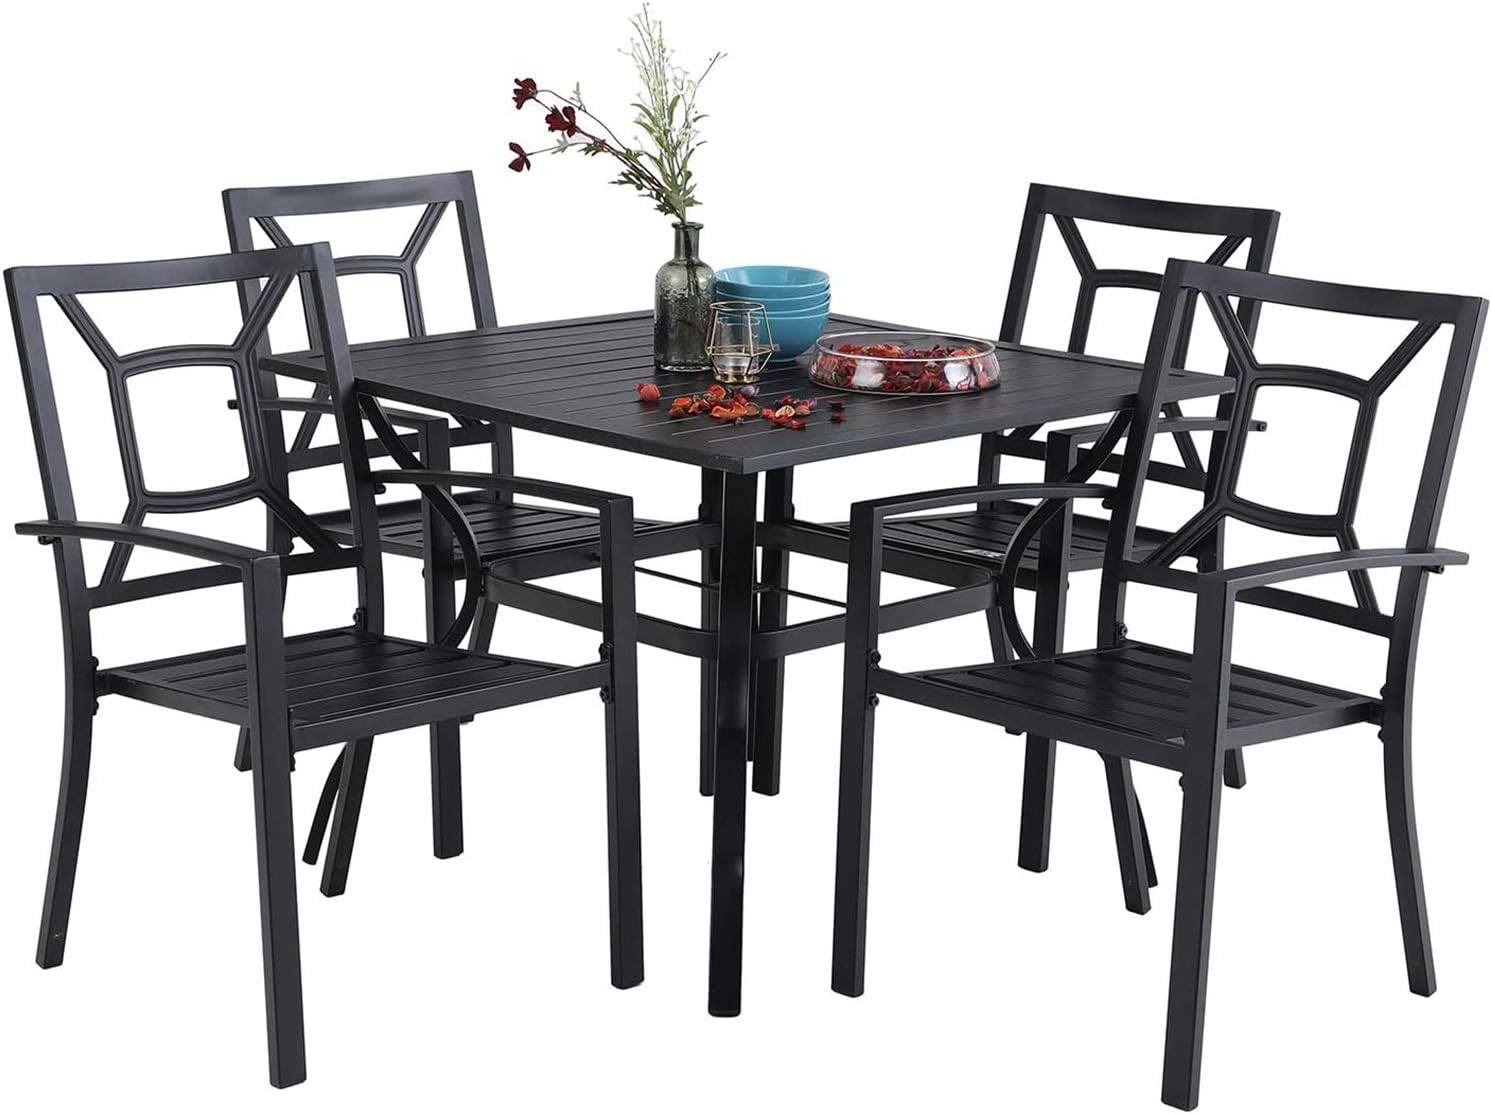 PHI VILLA 5 Piece Metal Patio Dining Set Armrest, Larger Square Table Set, 37 Square Bistro Table and 4 Backyard Garden Stackable Chairs - Umbrella Hole 1.57, Black